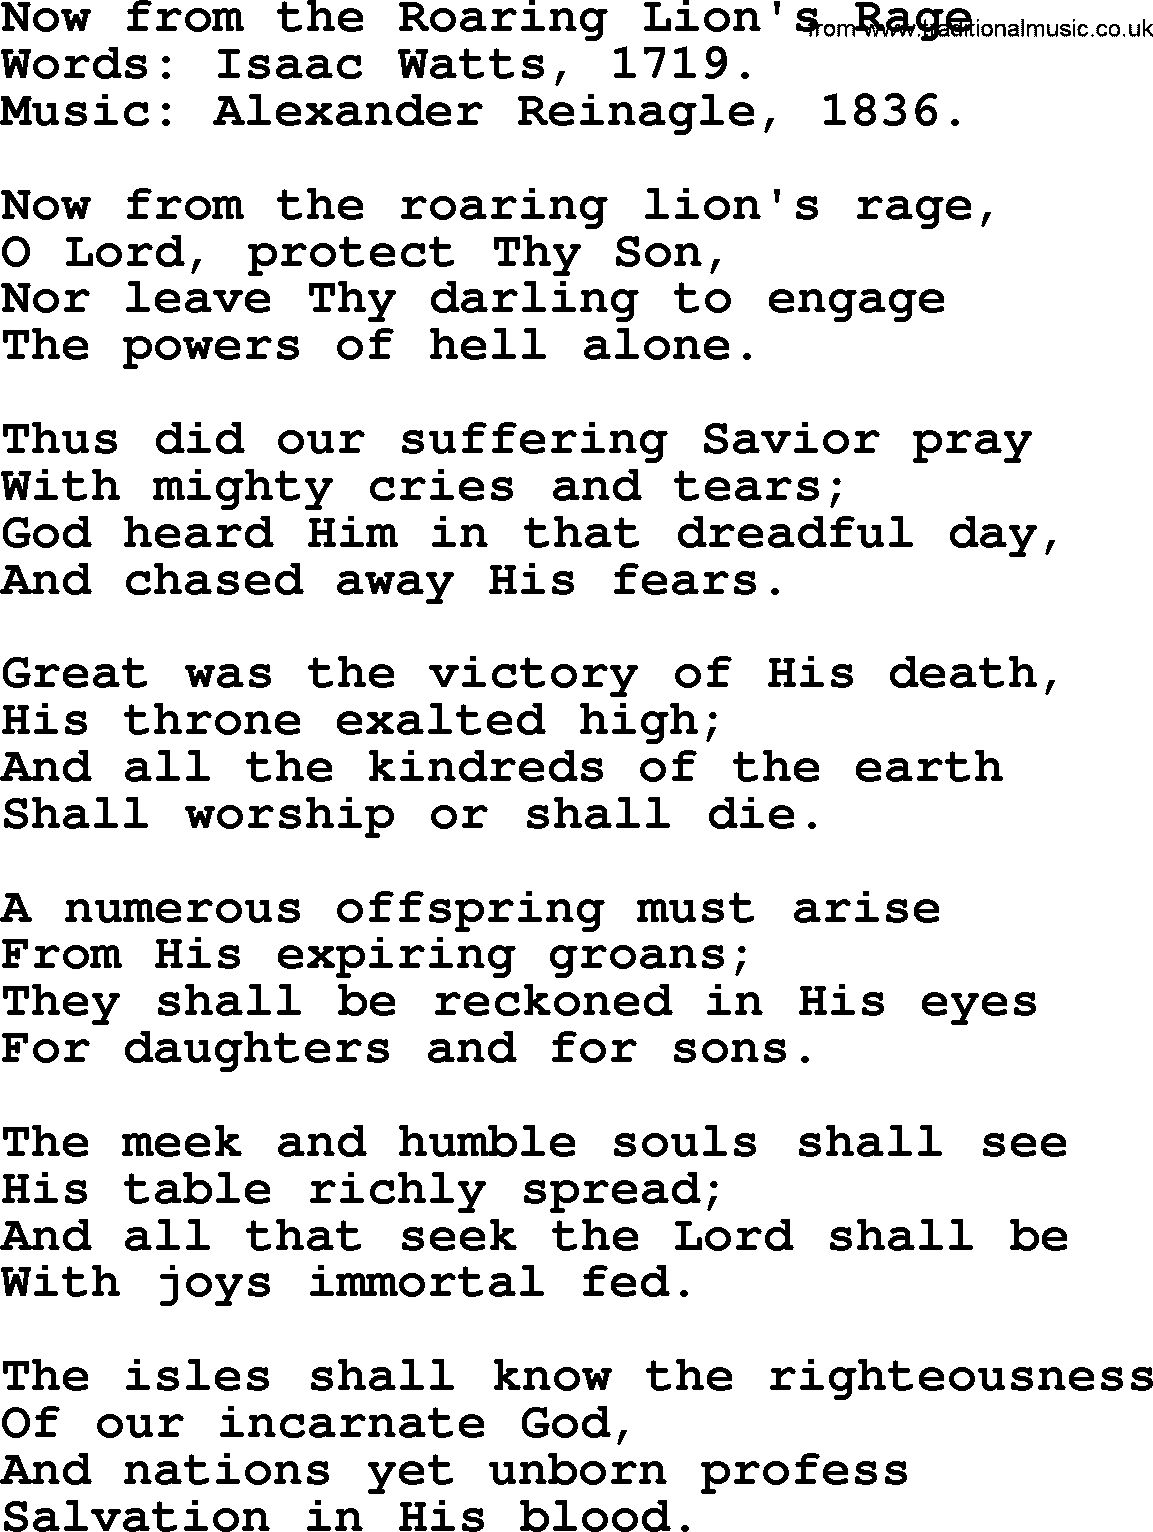 Isaac Watts Christian hymn: Now from the Roaring Lion's Rage- lyricss